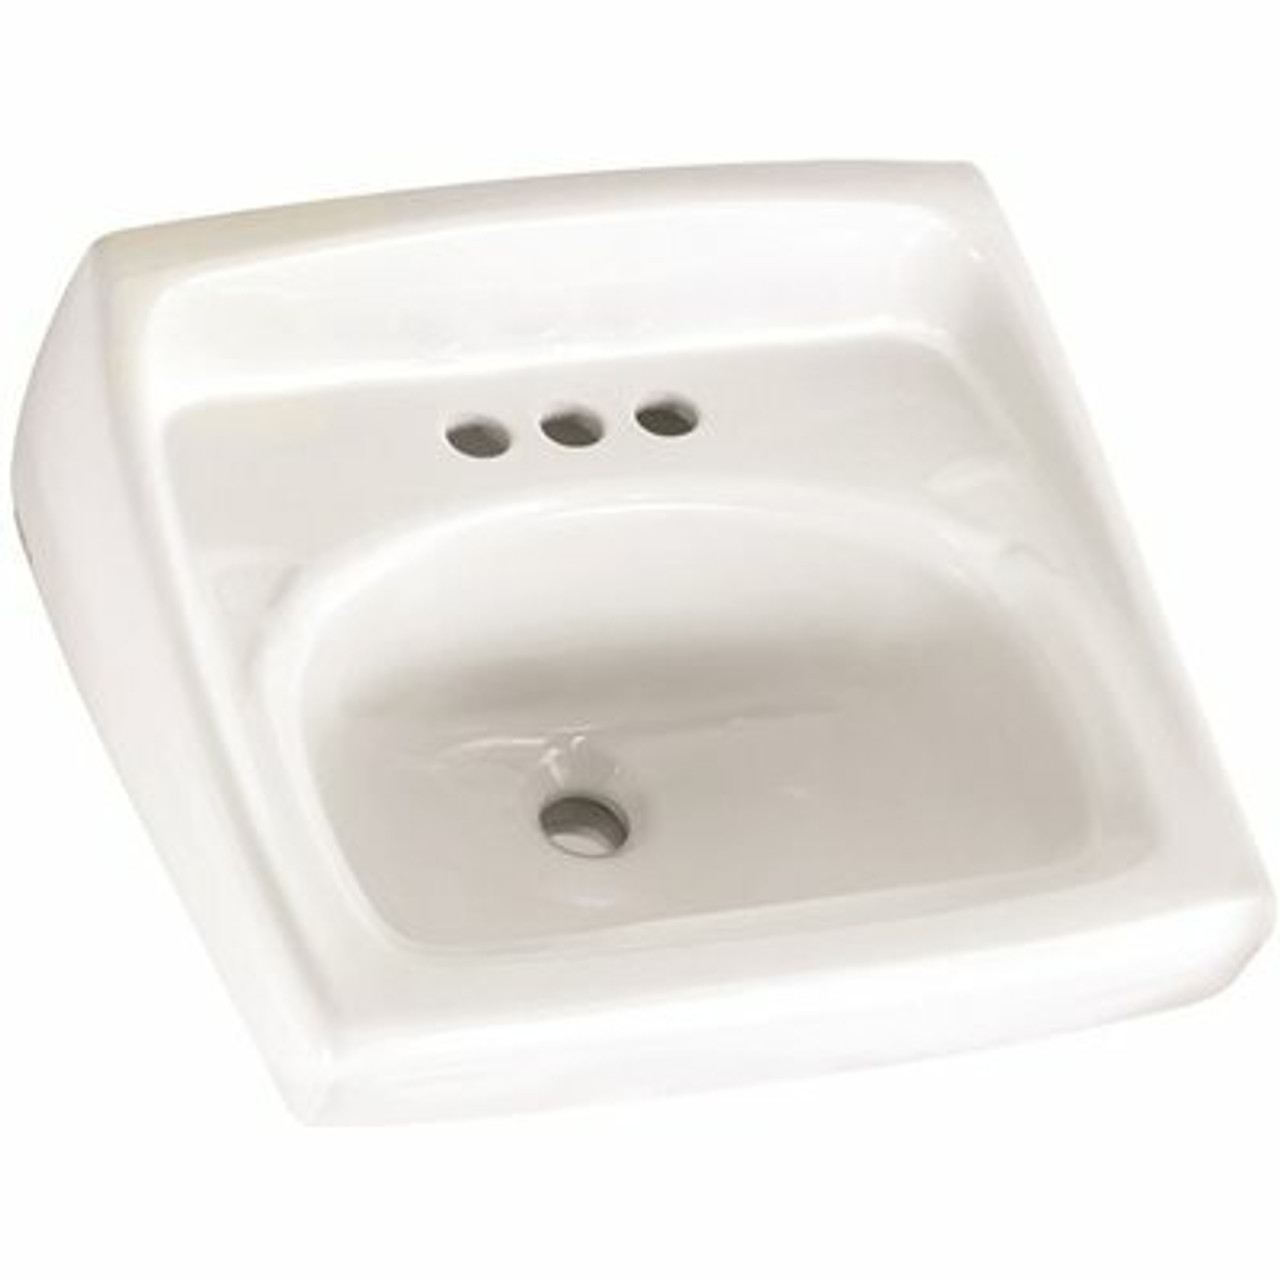 American Standard Lucerne Wall-Mounted Bathroom Vessel Sink With Faucet Holes On 4 In. Center In White